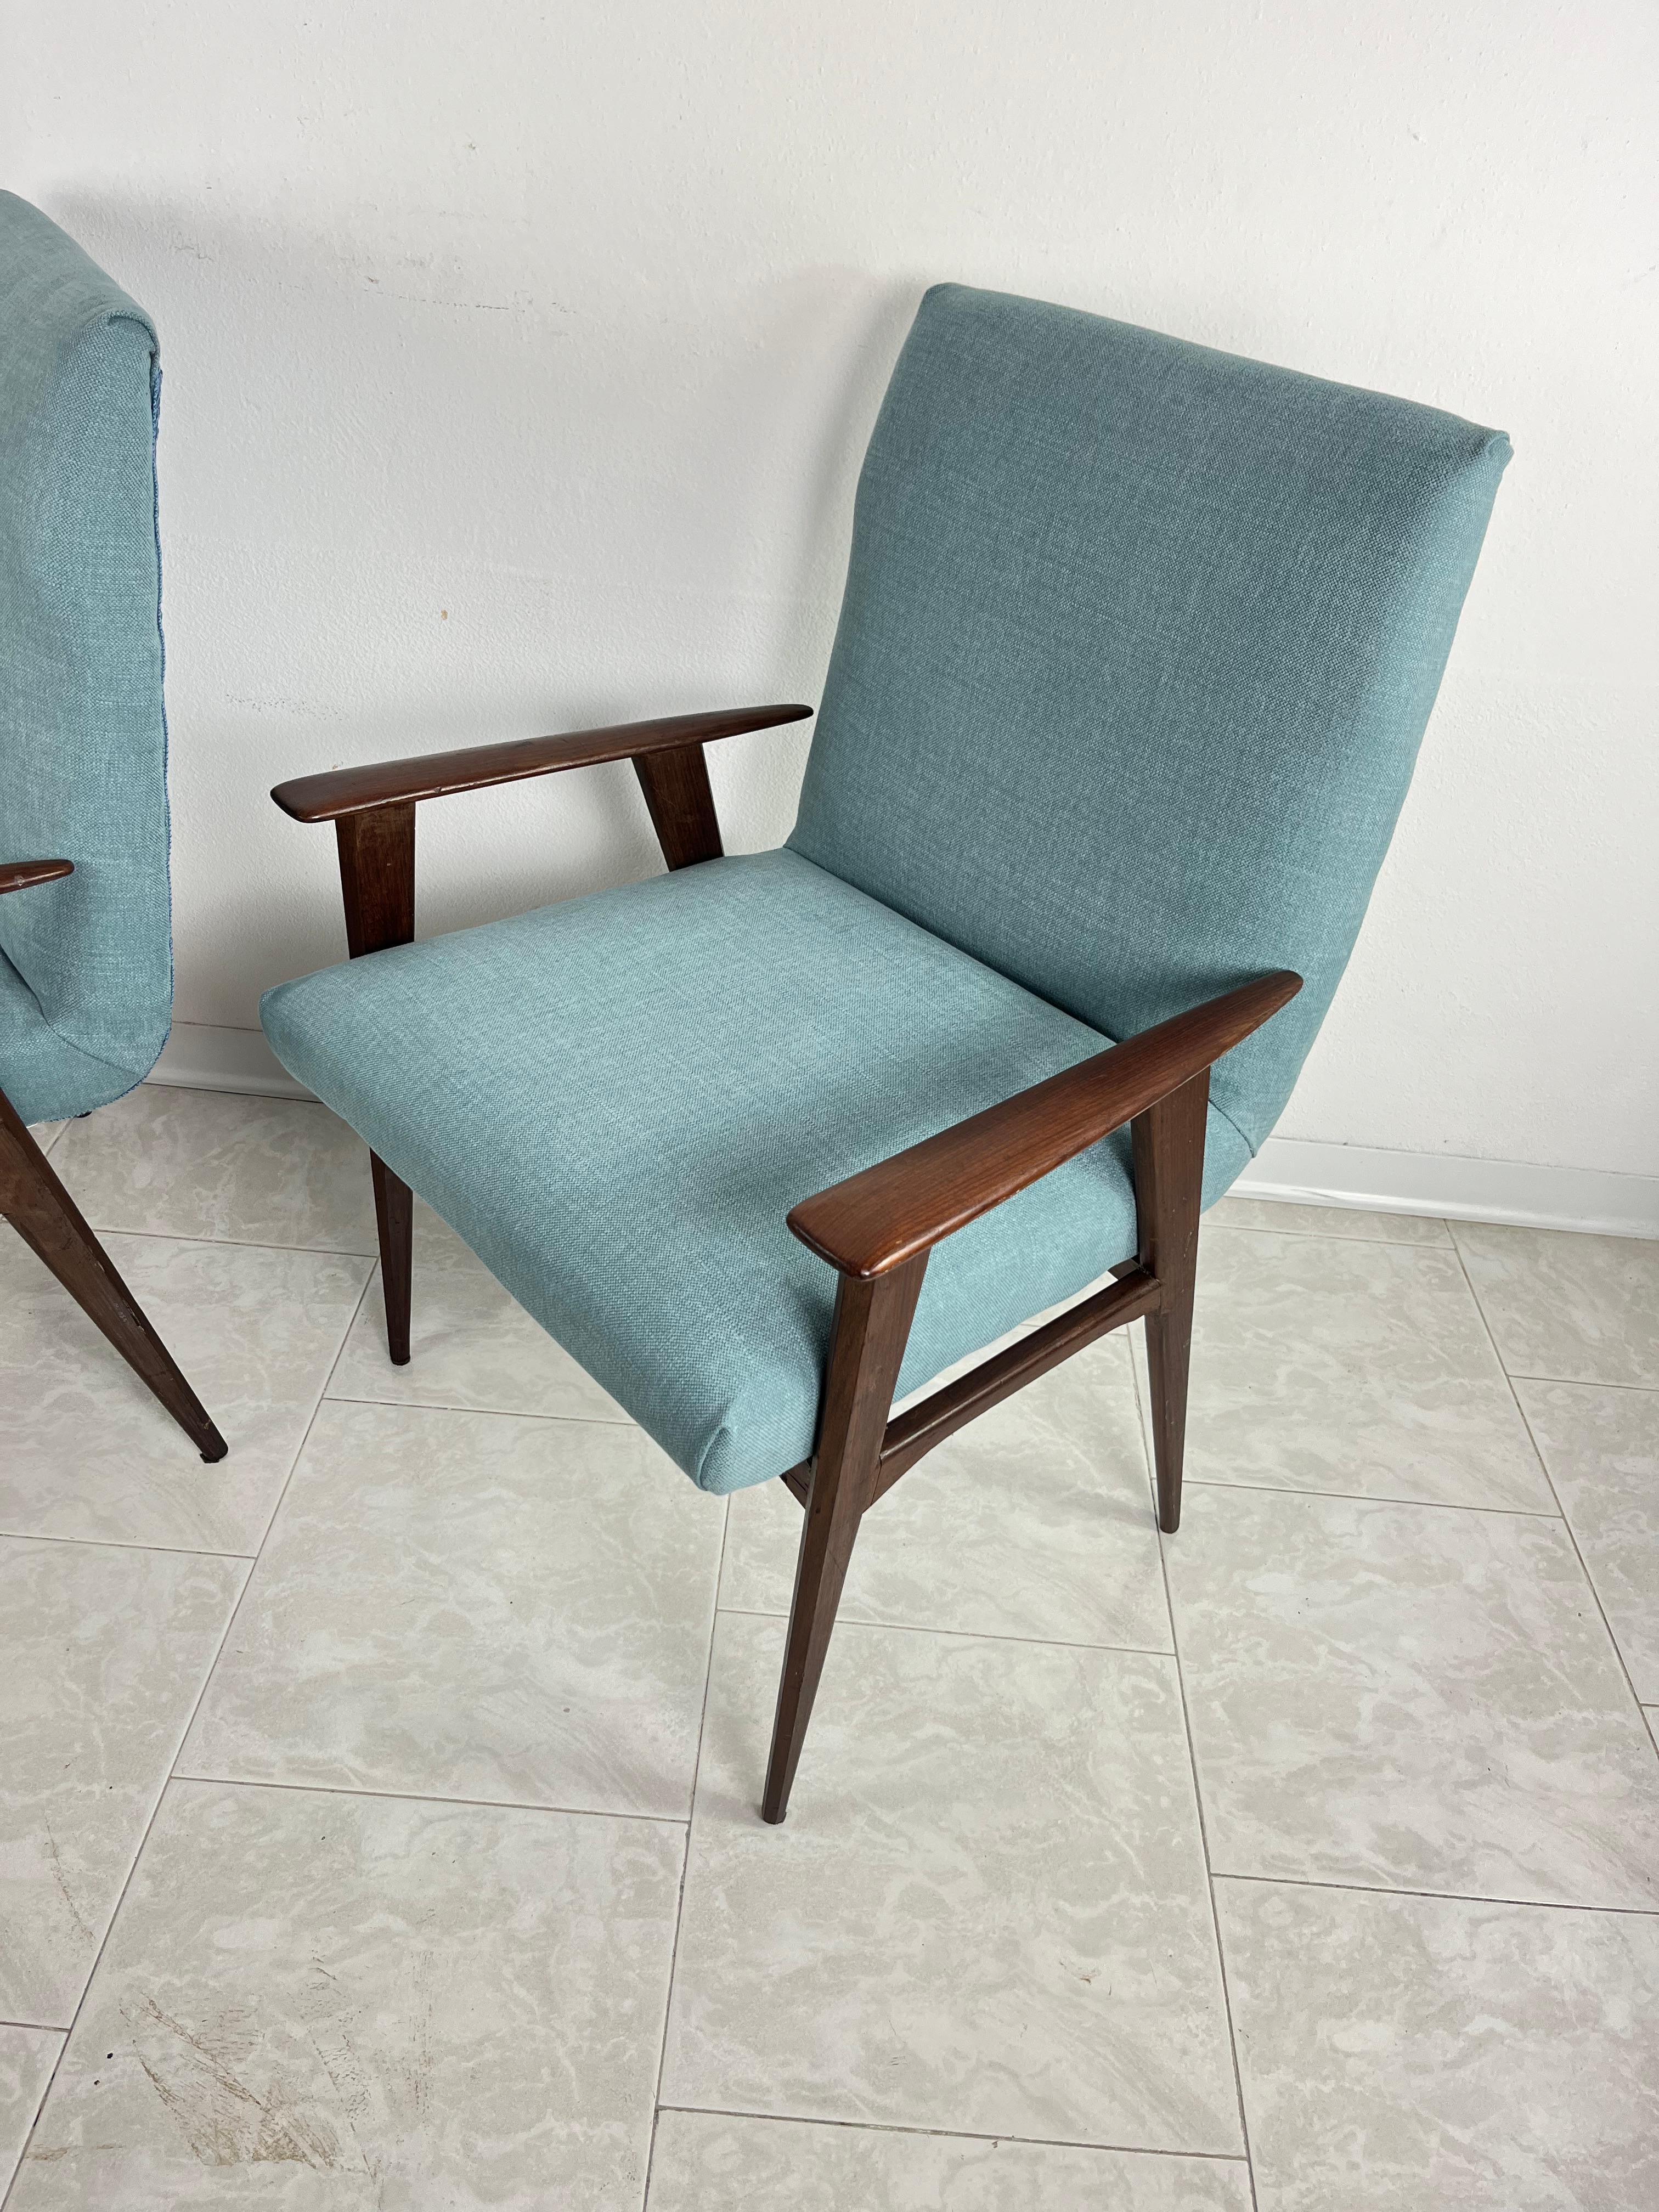 Set of 2 Mid-Century Armchairs, Italian design 1960s
Just restored and reupholstered, they are in excellent condition.